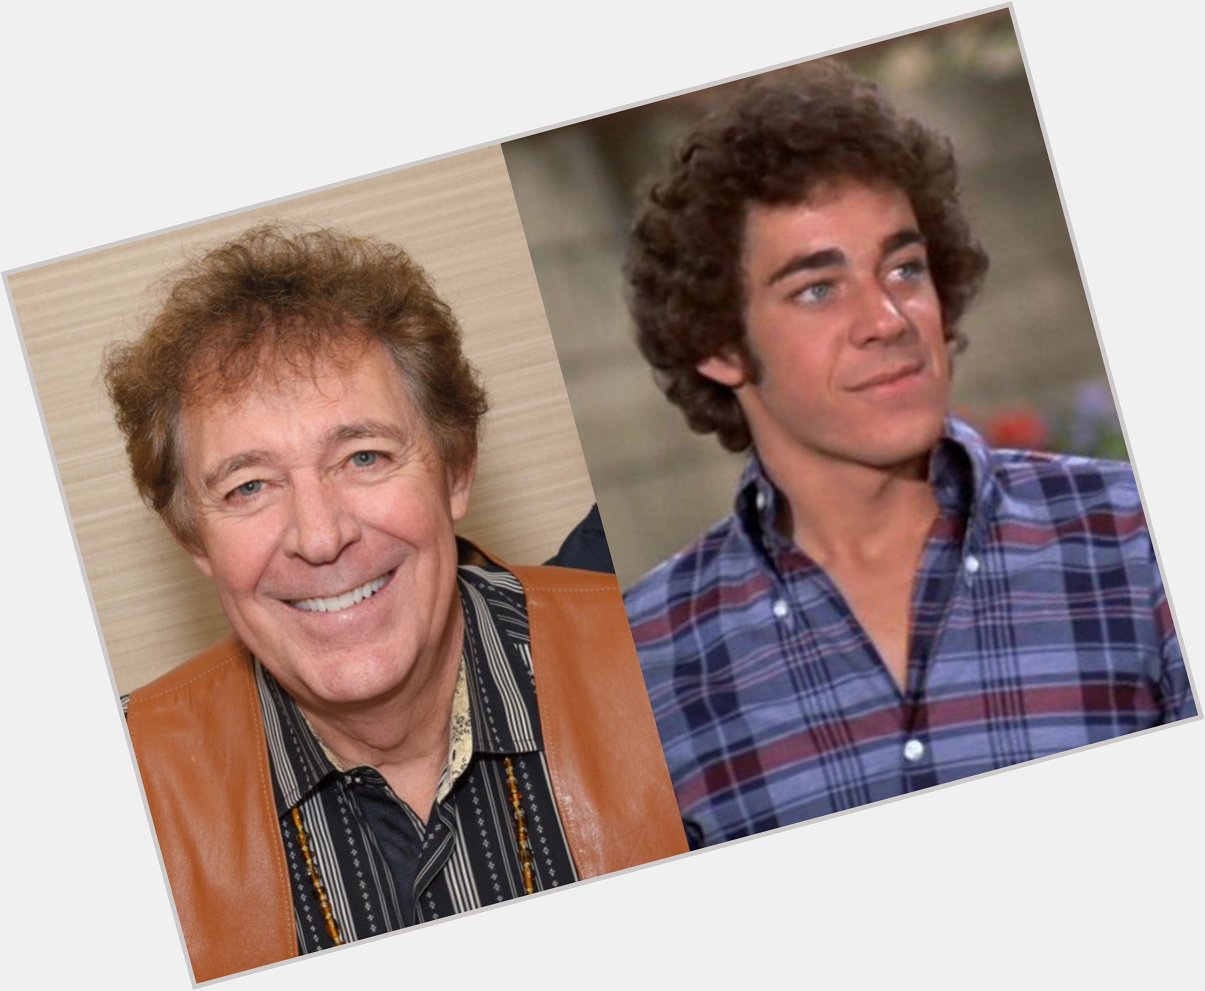 Happy 67th Birthday to Barry Williams! The actor who played Greg Brady on The Brady Bunch. 